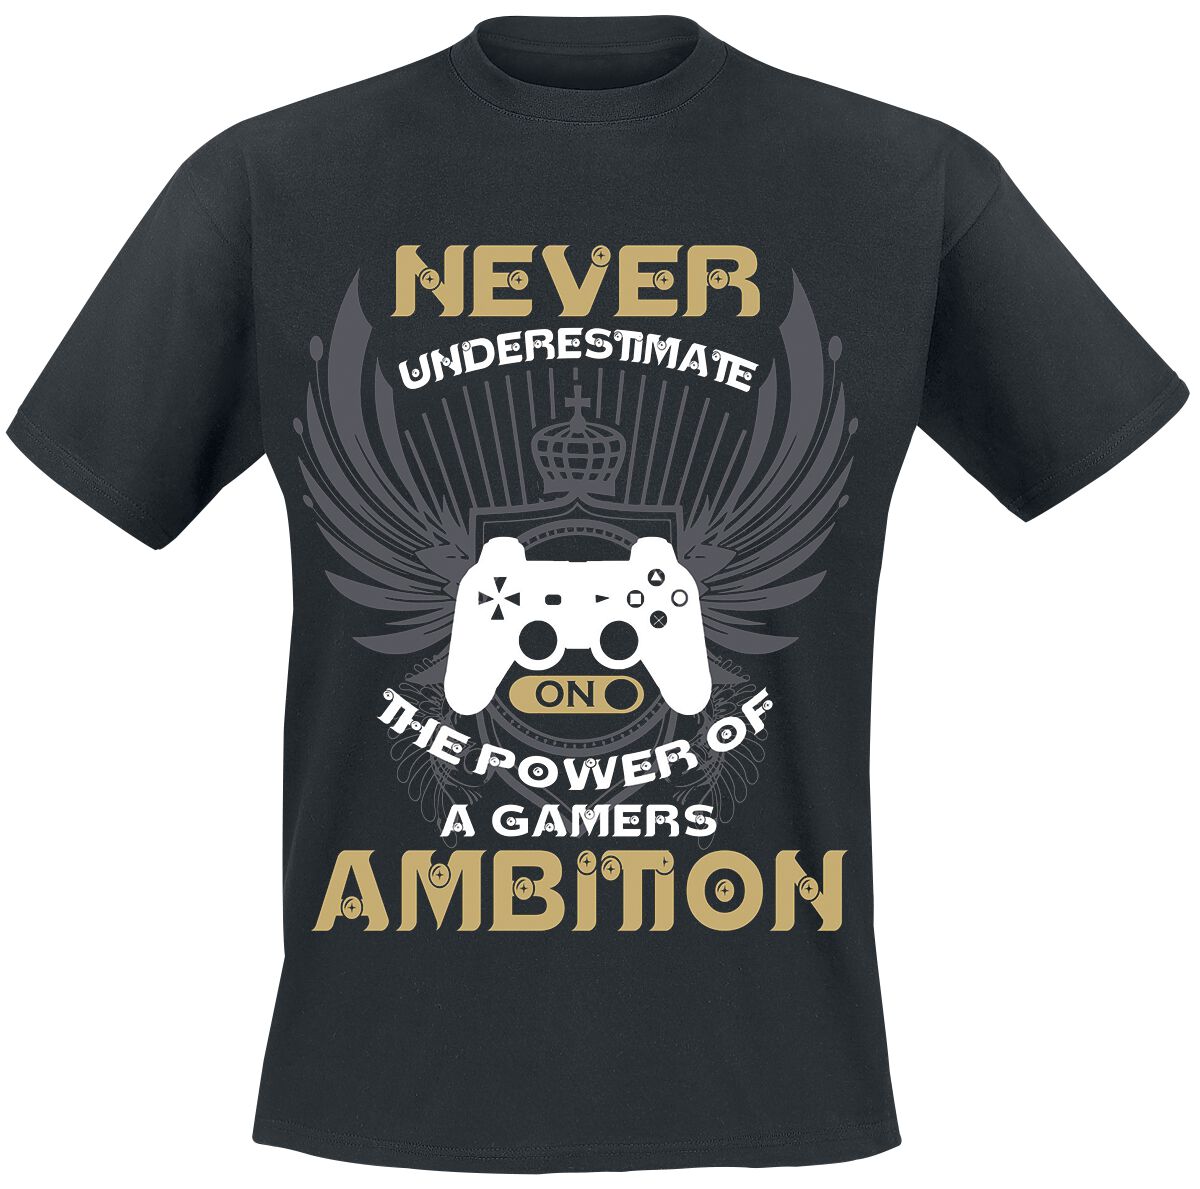 Never Underestimate The Power of a Gamer's Ambition  T-Shirt black